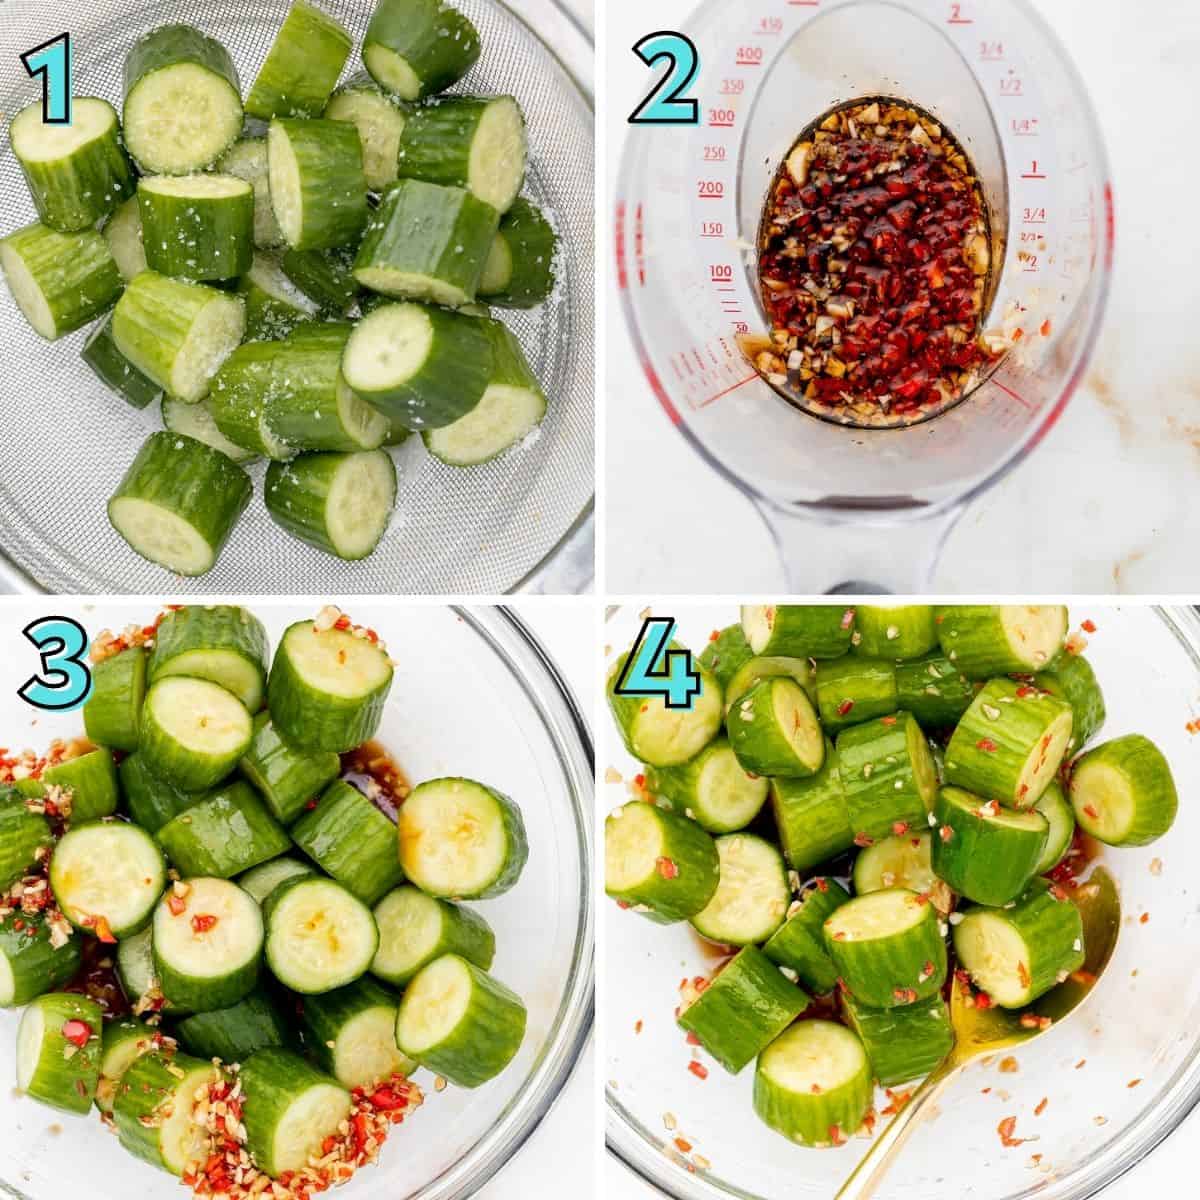 Step by step instructions to prepare dim sum cucumbers, in a collage.